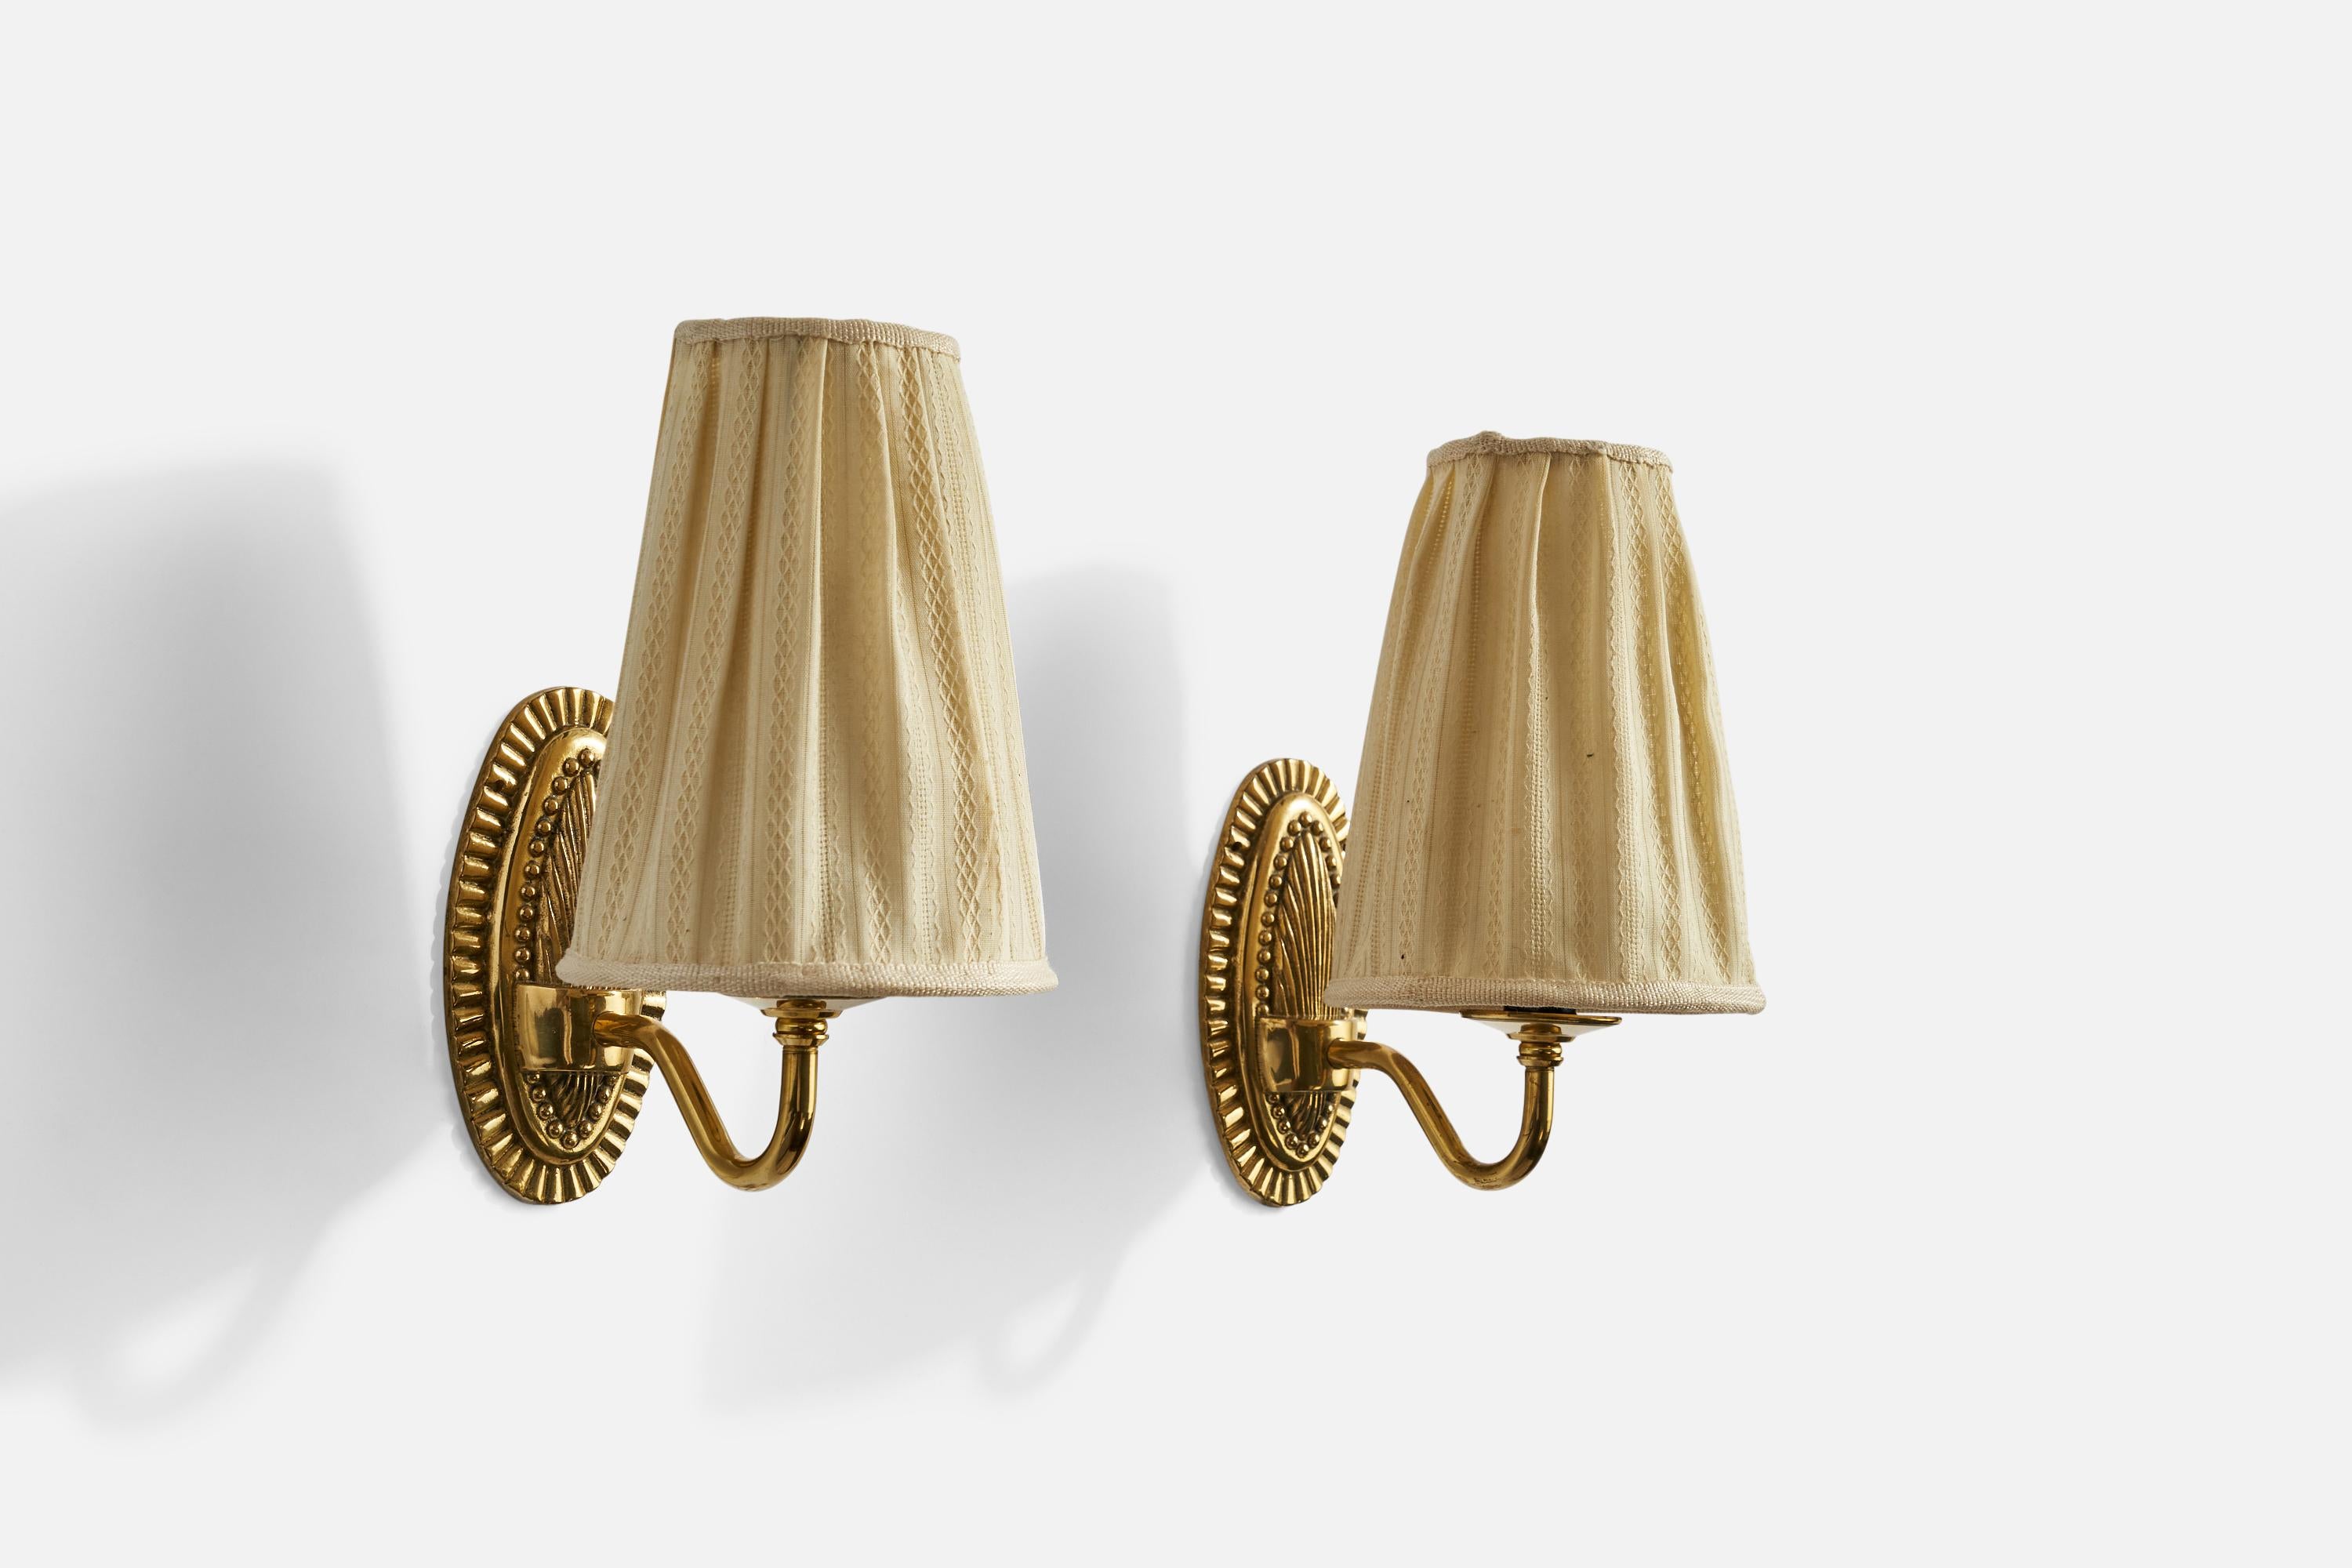 A pair of brass and beige fabric wall lights designed and produced in Sweden, c. 1950s.

Overall Dimensions (inches): 9”  H x 5”  W x 7.5” D
Back Plate Dimensions (inches): N/A
Bulb Specifications: E-12 Bulb
Number of Sockets: 2
All lighting will be